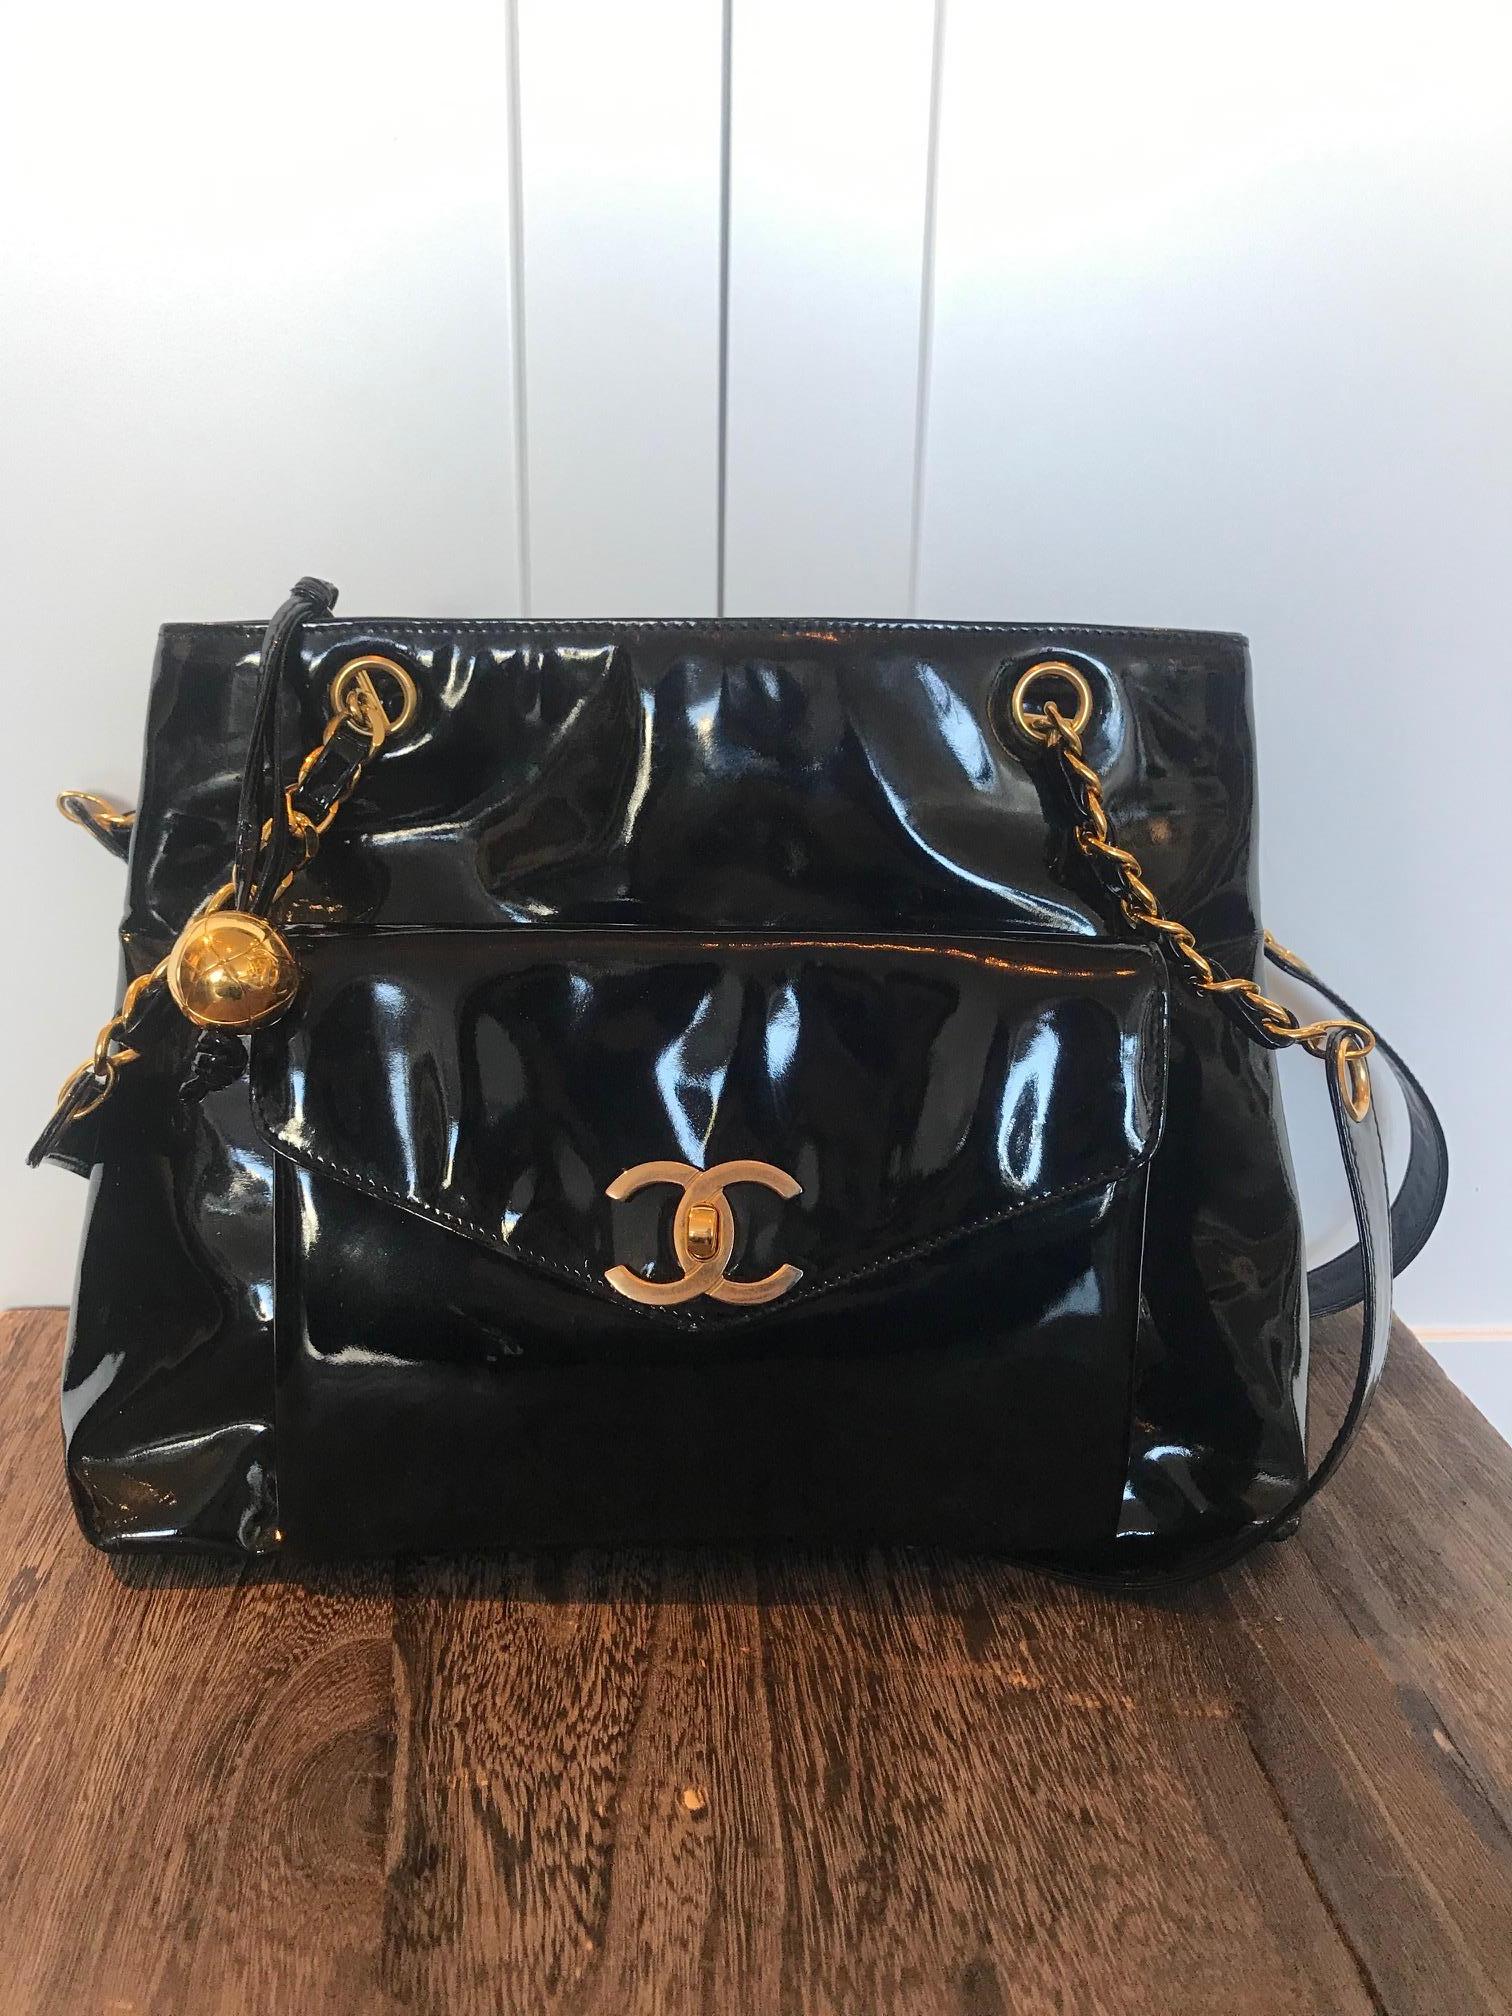 Black patent leather. Gold-tone hardware. Snap closure. Dual flat long shoulder straps featuring classic leather and chain. One open exterior pockets One Exterior pocket with CC turn-lock closure. Leather interior. Three interior compartments with